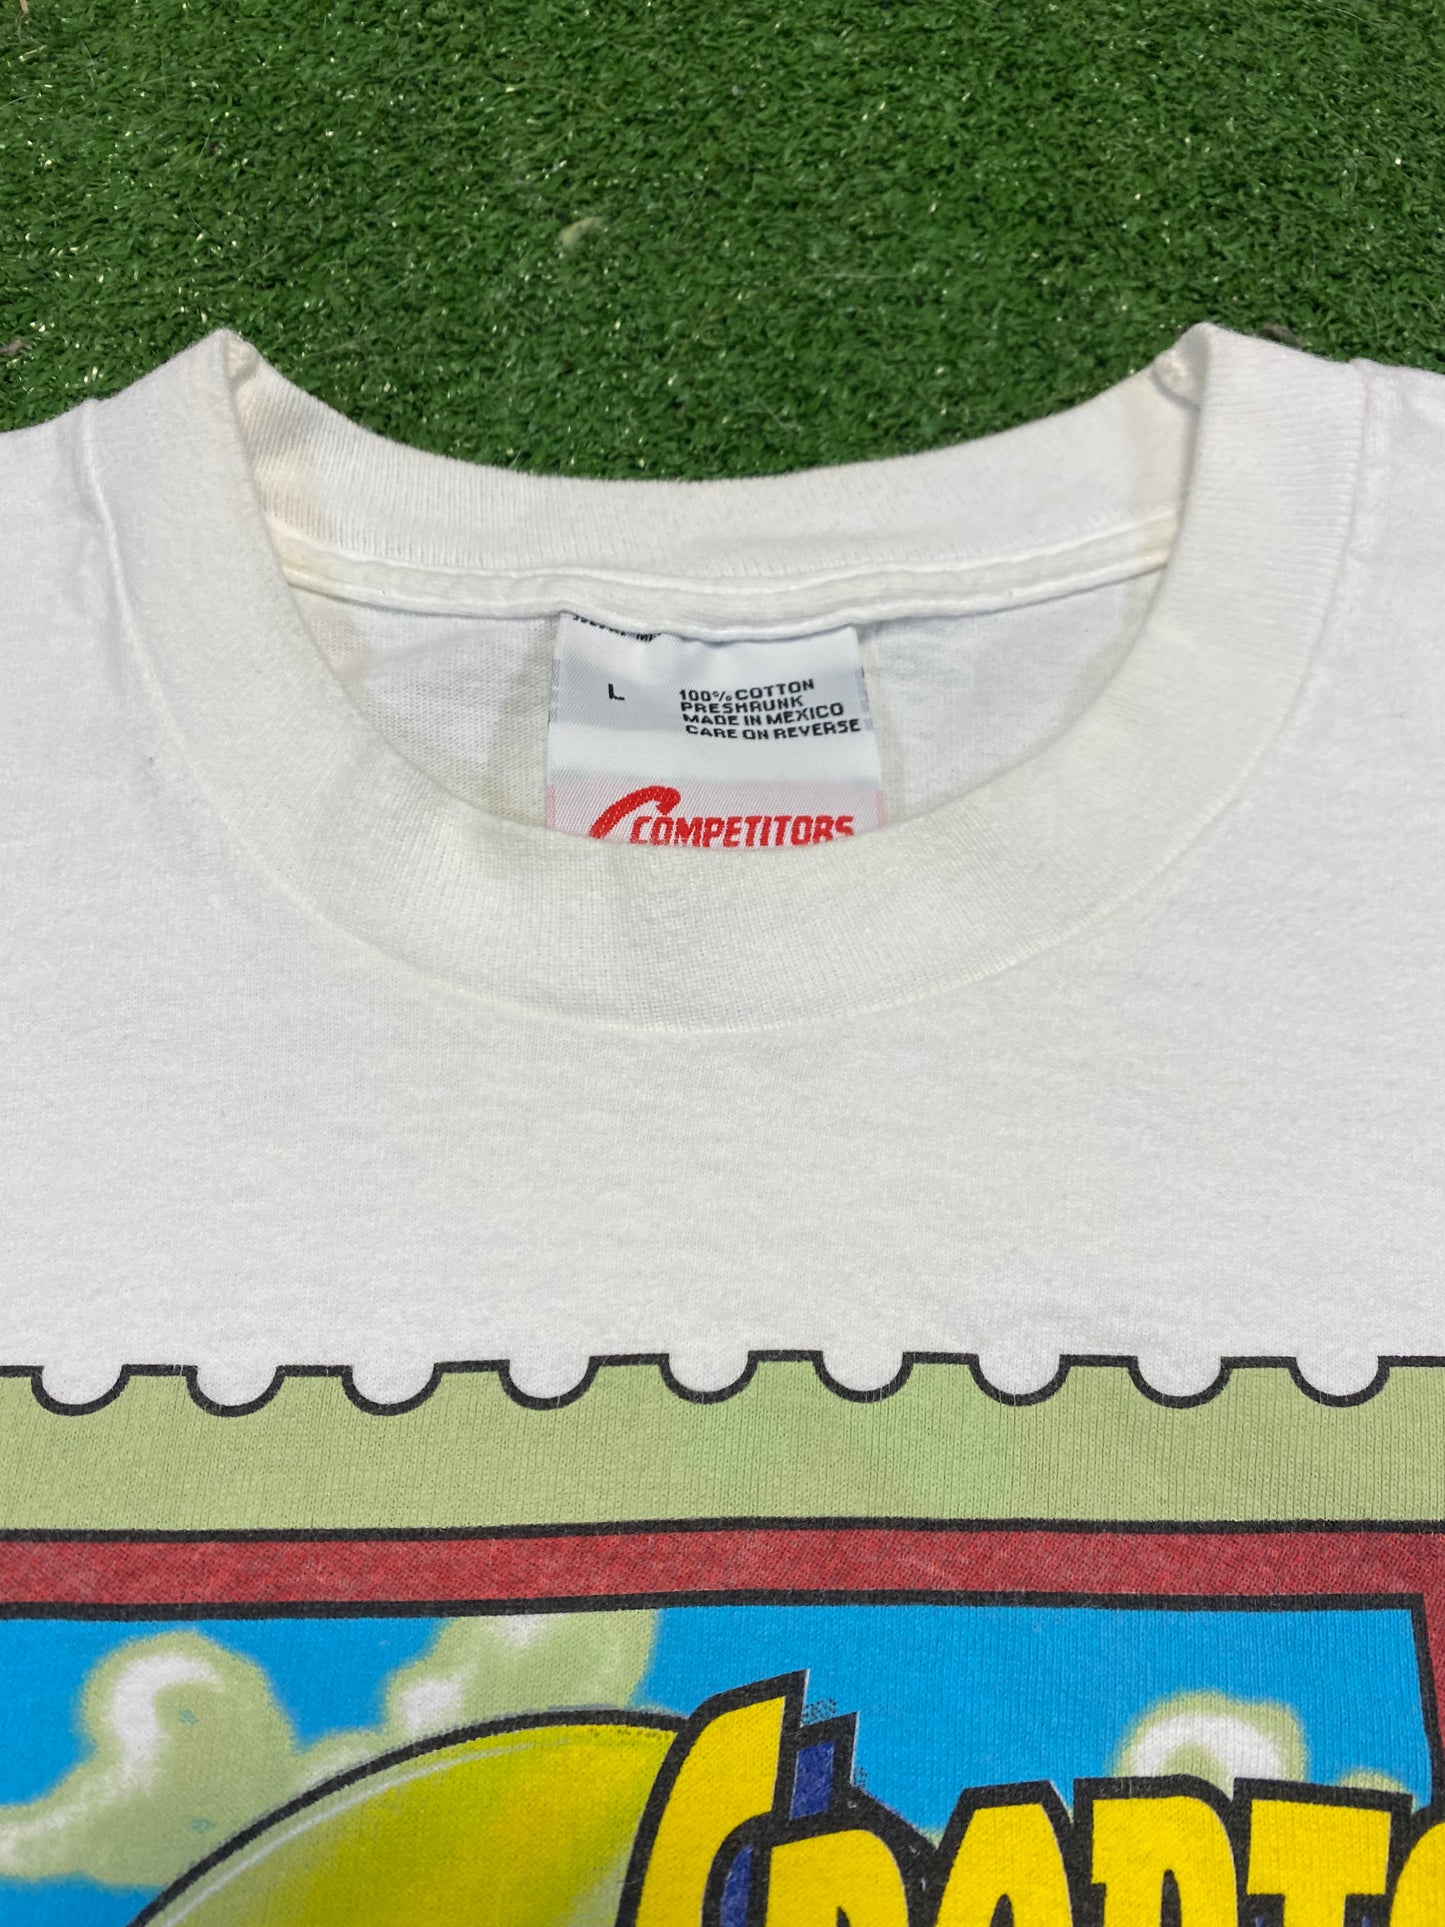 Motorsports by Mail 90’s Stamp T-Shirt